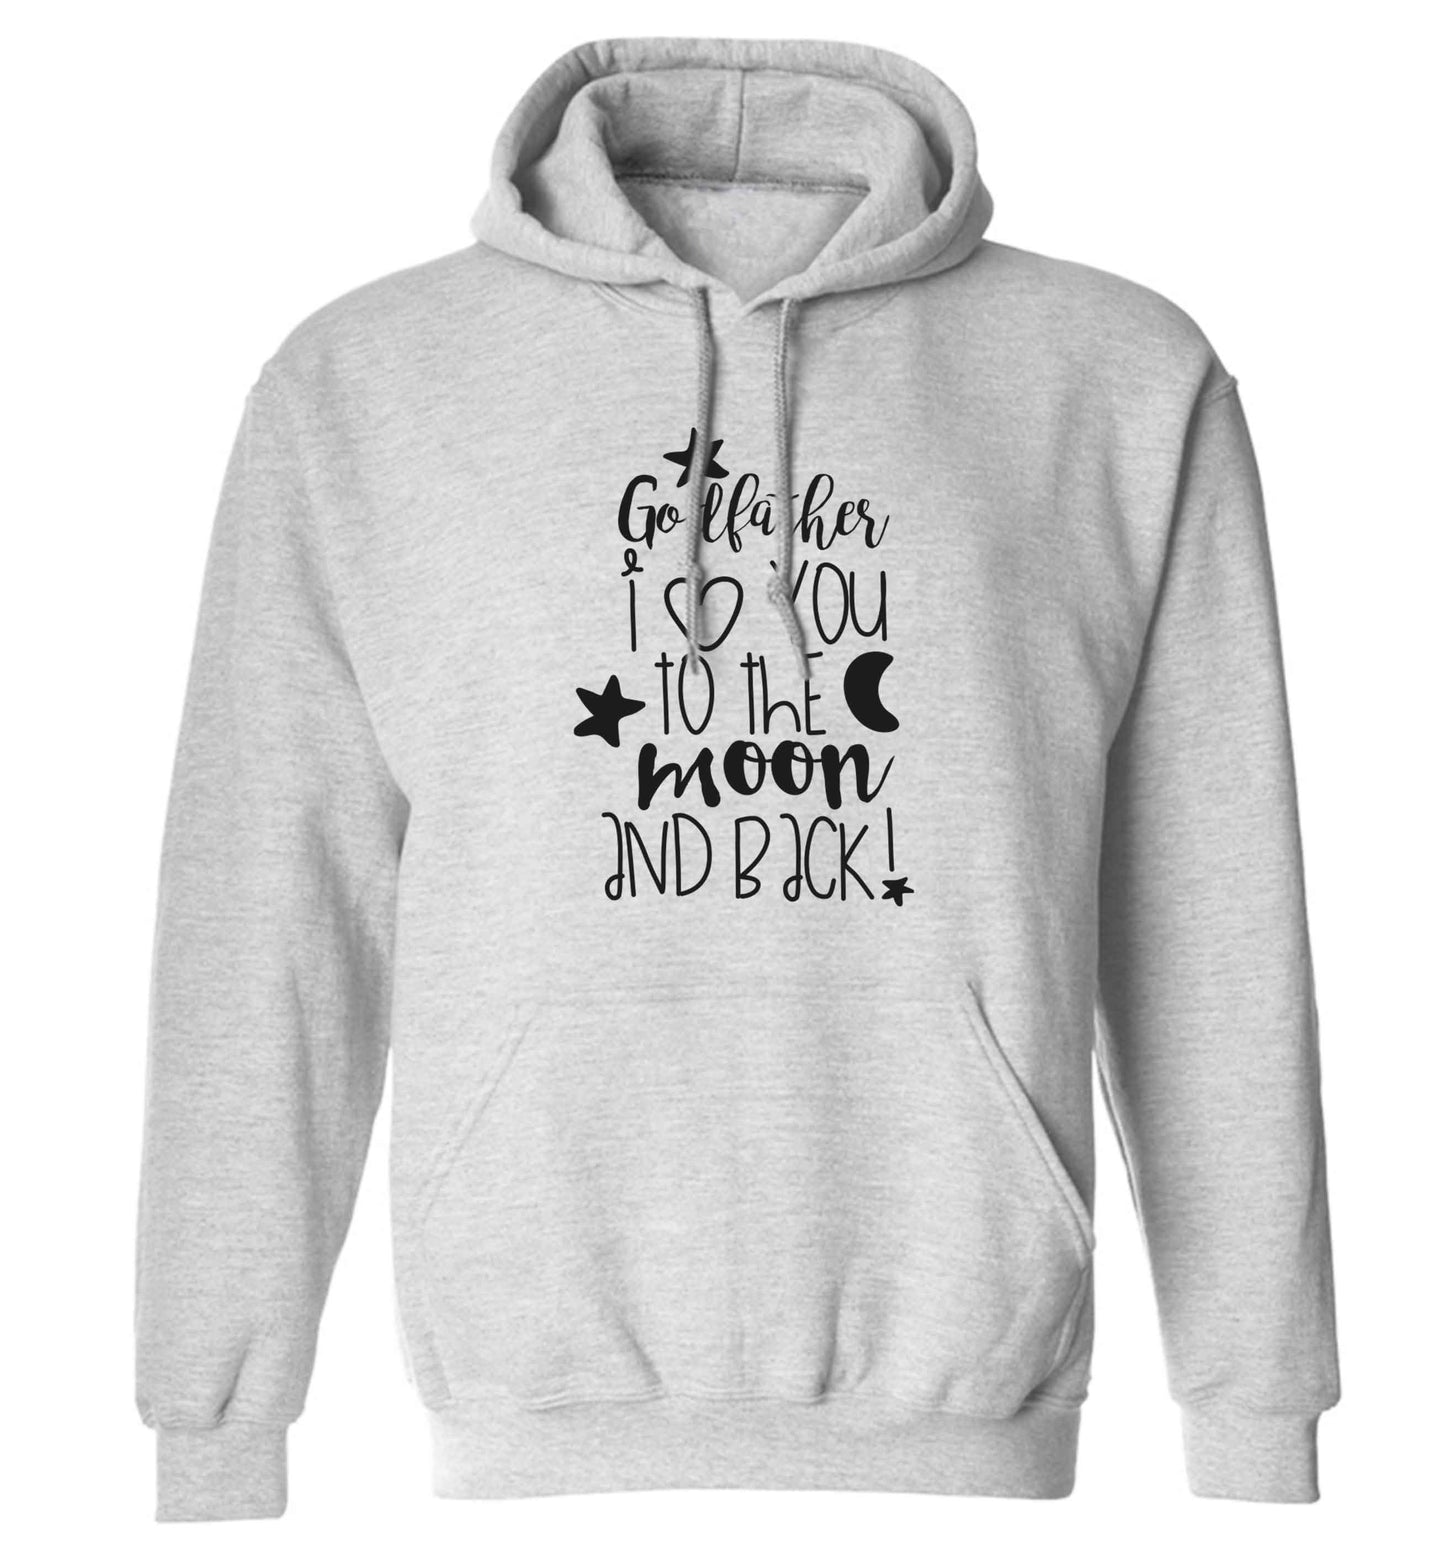 Godfather I love you to the moon and back adults unisex grey hoodie 2XL